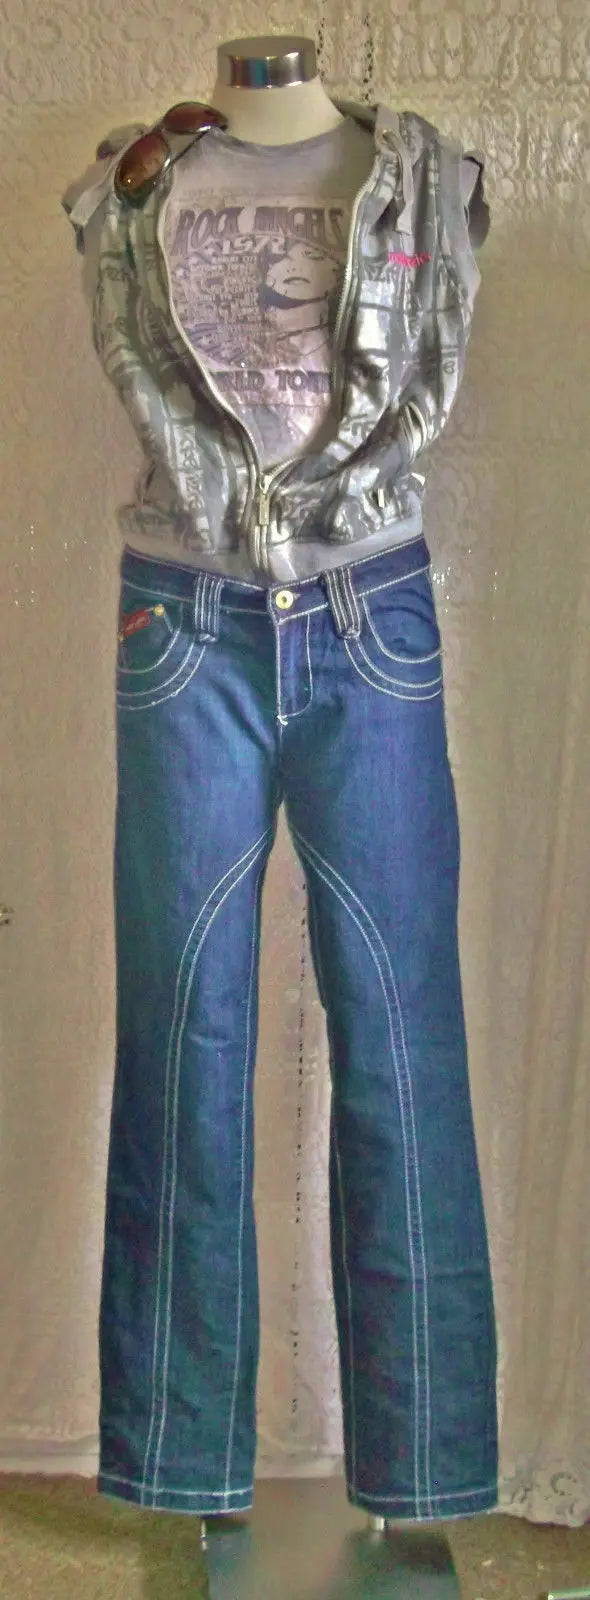 BABY PHAT DARK DENIM JEANS .SIZE 32.with gold/white embroidered back pockets Baby Phat